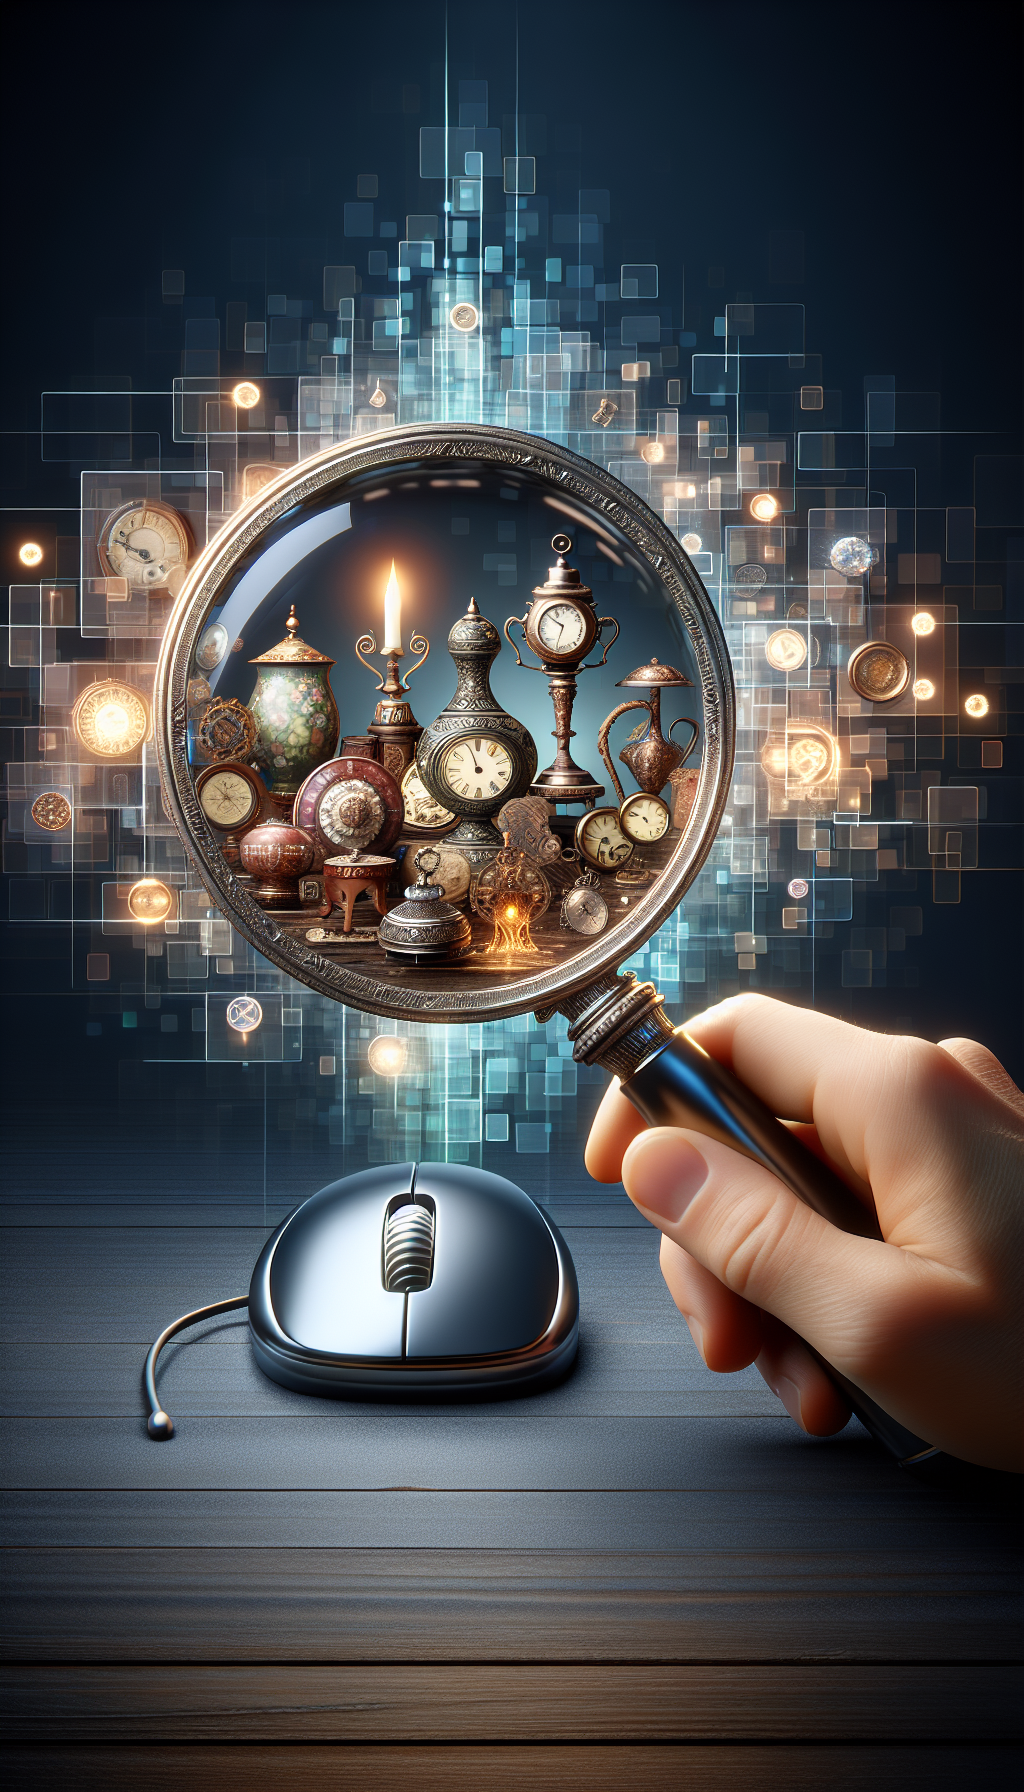 A sleek, digital magnifying glass peers into a virtual realm, revealing a mosaic of antique treasures—clocks, vases, jewelry—that glow with valuation tags. The glass connects to a computer mouse, subtly indicating the online nature of the appraisal. Background pixels suggest a seamless transition from the old to the digital era, embodying the blend of antiquity and modern technology.